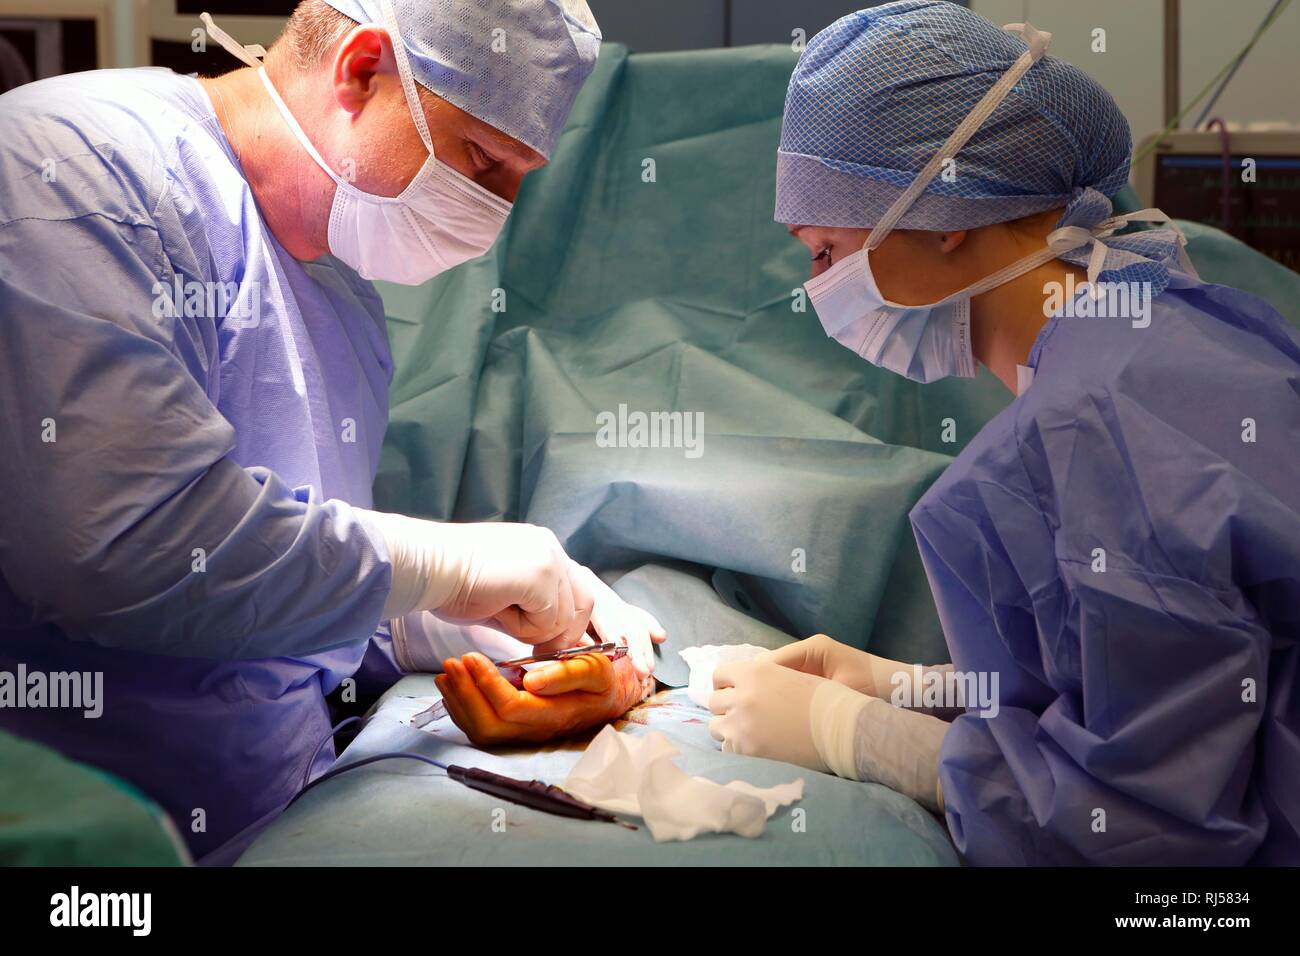 Surgeons during surgery in the operating theatre, hand surgery, Czech Republic Stock Photo